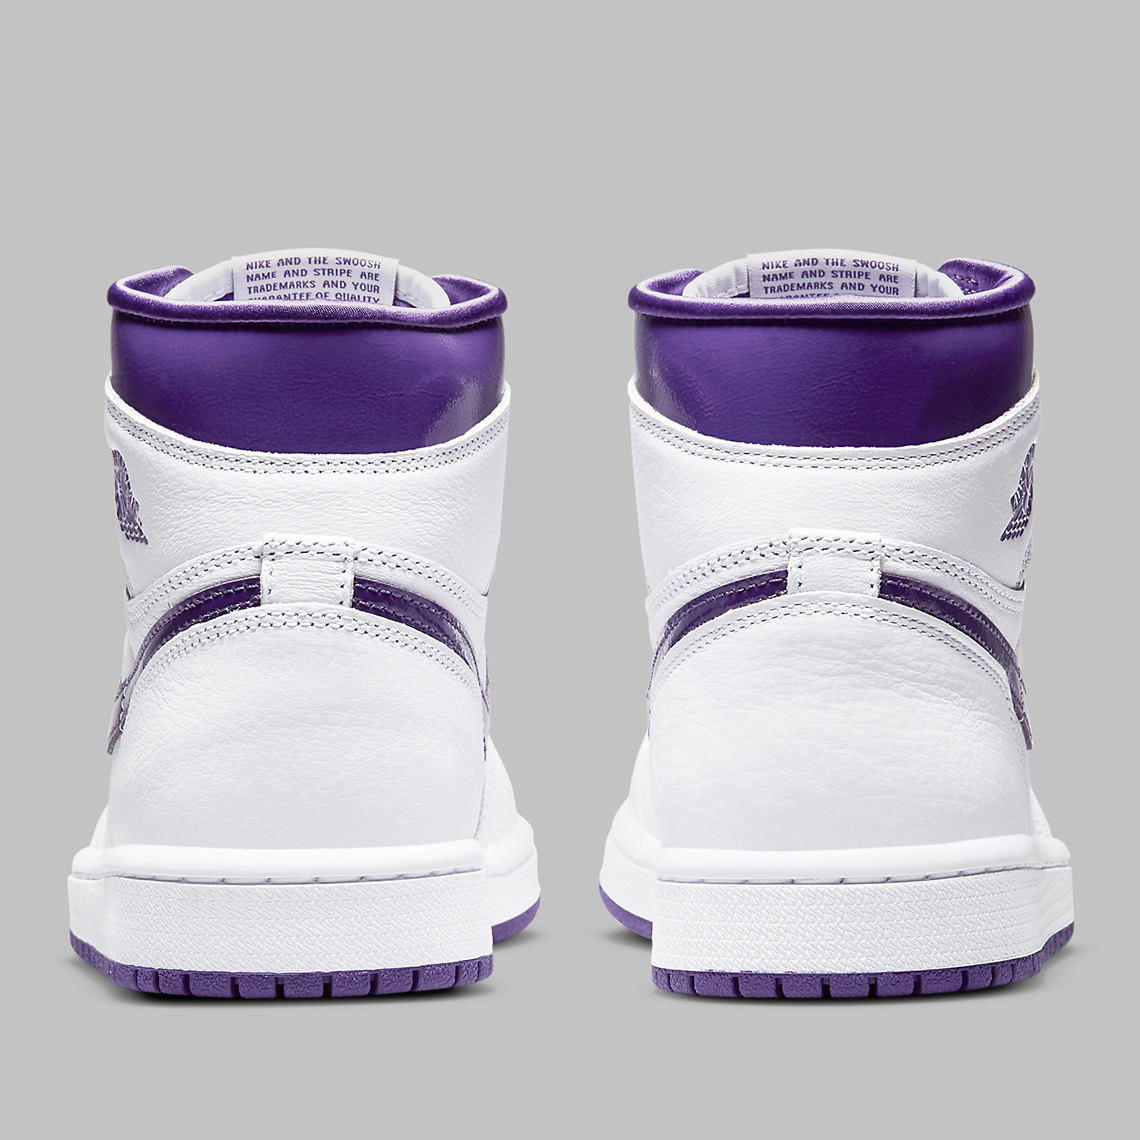 Synthetic leather strap with Jordan branding Retro High Og Wmns White Court Purple Cd0461 151 6